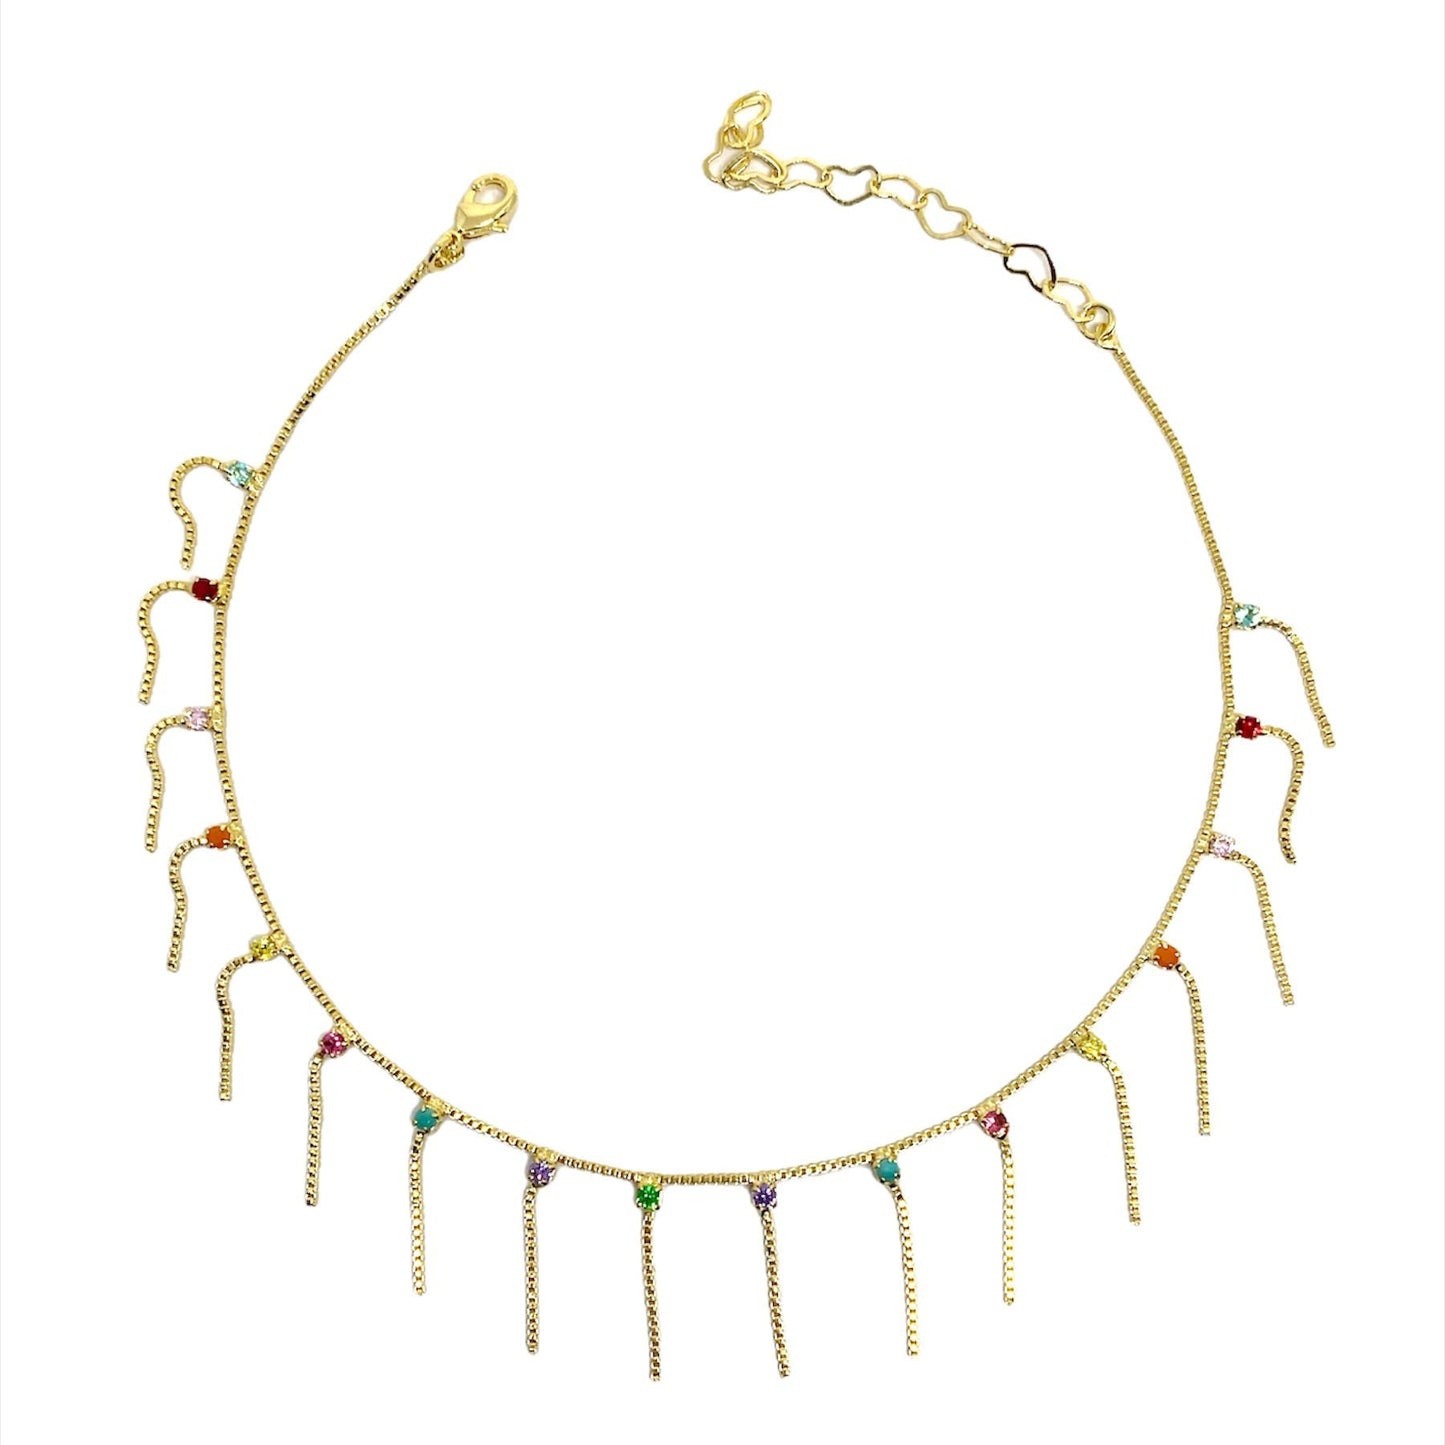 GoldFi 18k Gold Filled Fringed Box Chain Anklet Featuring Details Of Micro Zirconia Available In Multicolor, Black or Clear